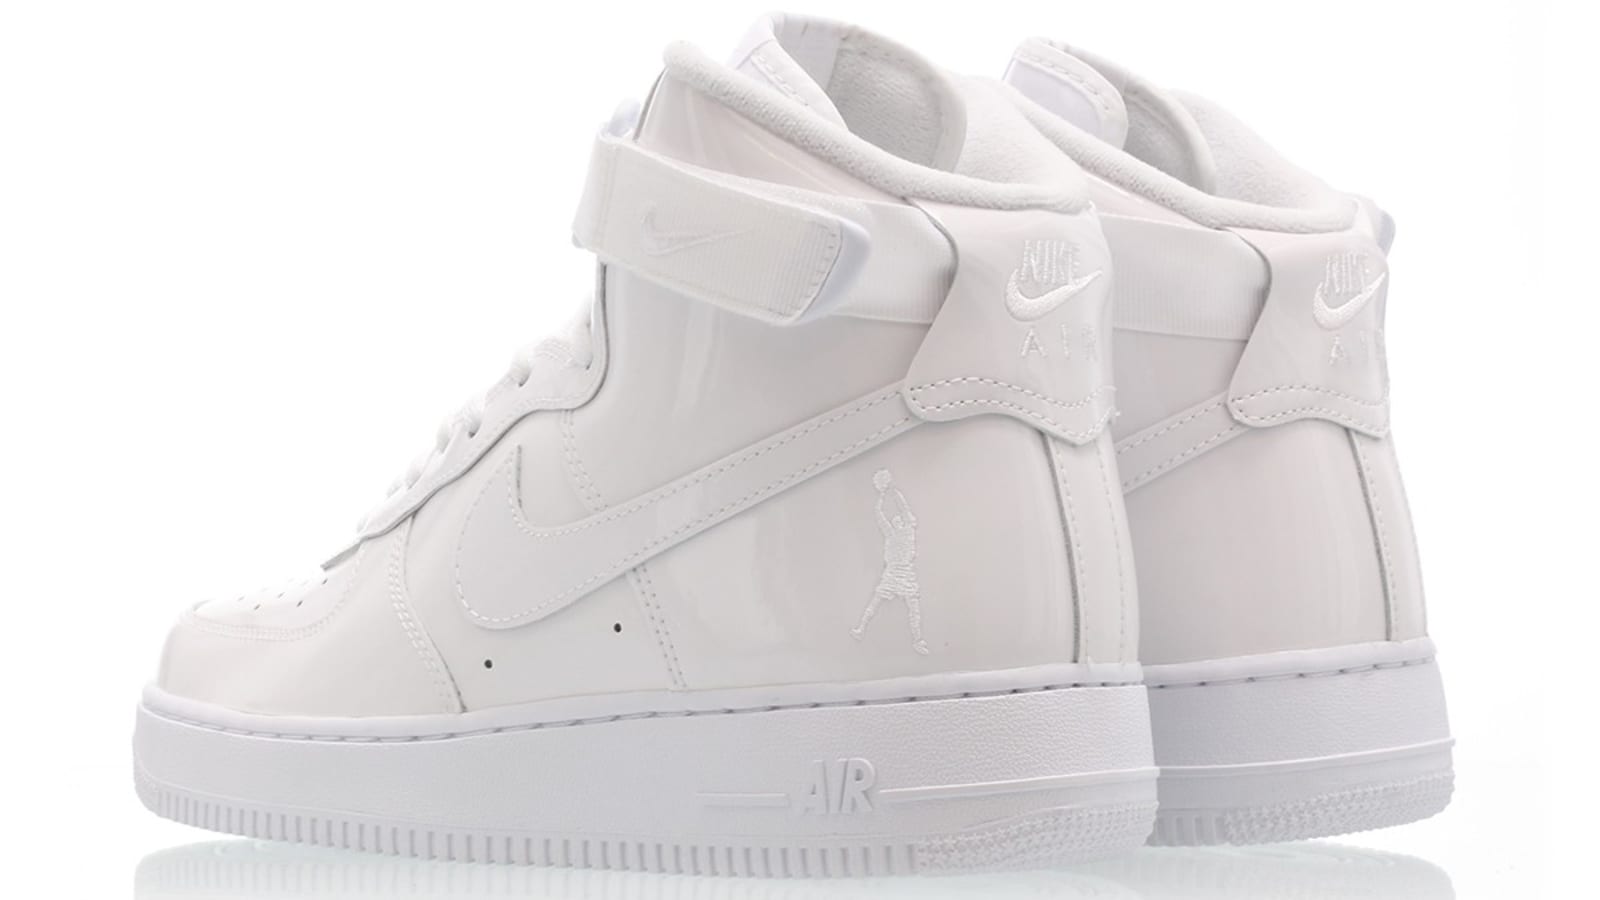 Rasheed Wallace's Nike Air Force 1 High Drops This Weekend: Details